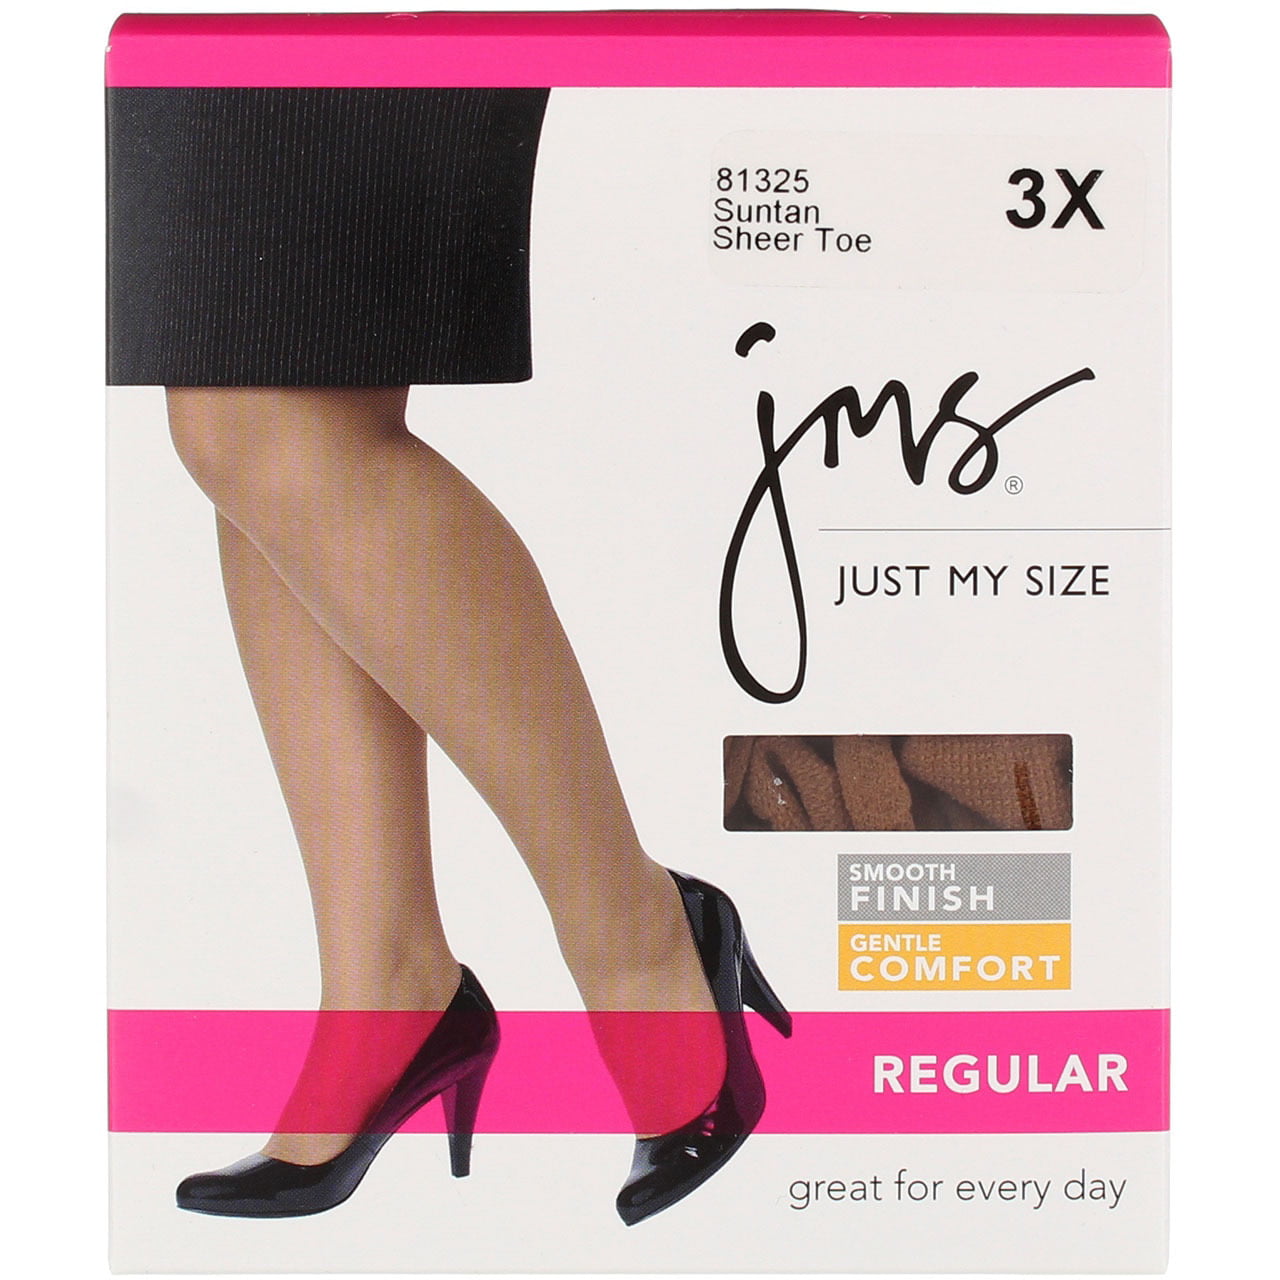 Just my size pantyhose for men